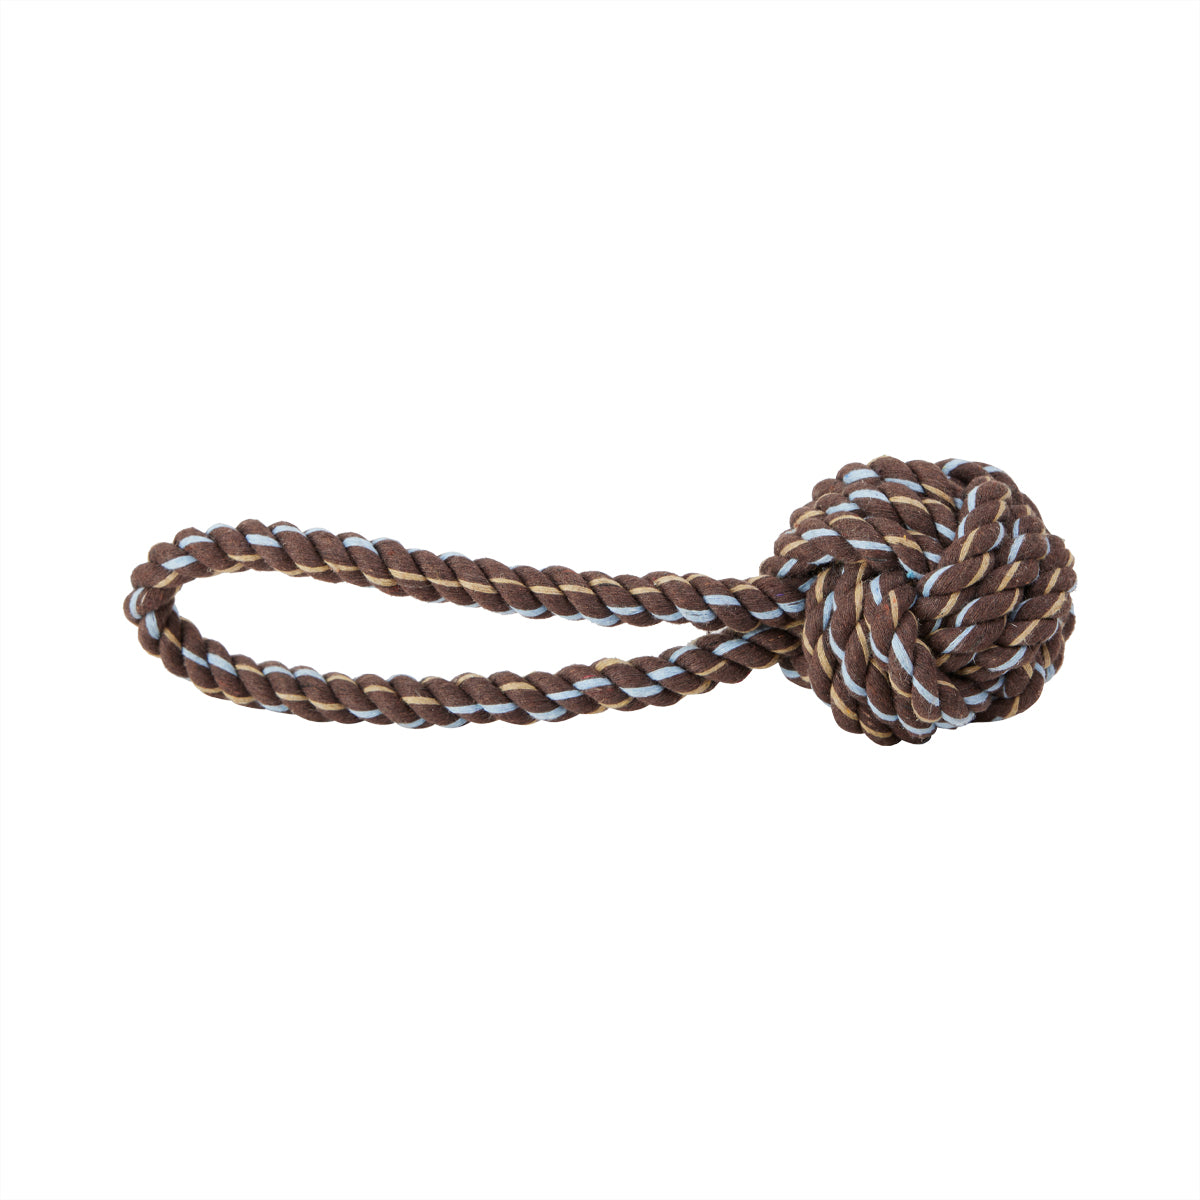 OYOY ZOO Otto Rope Dog Toy Let's Play 309 Choko